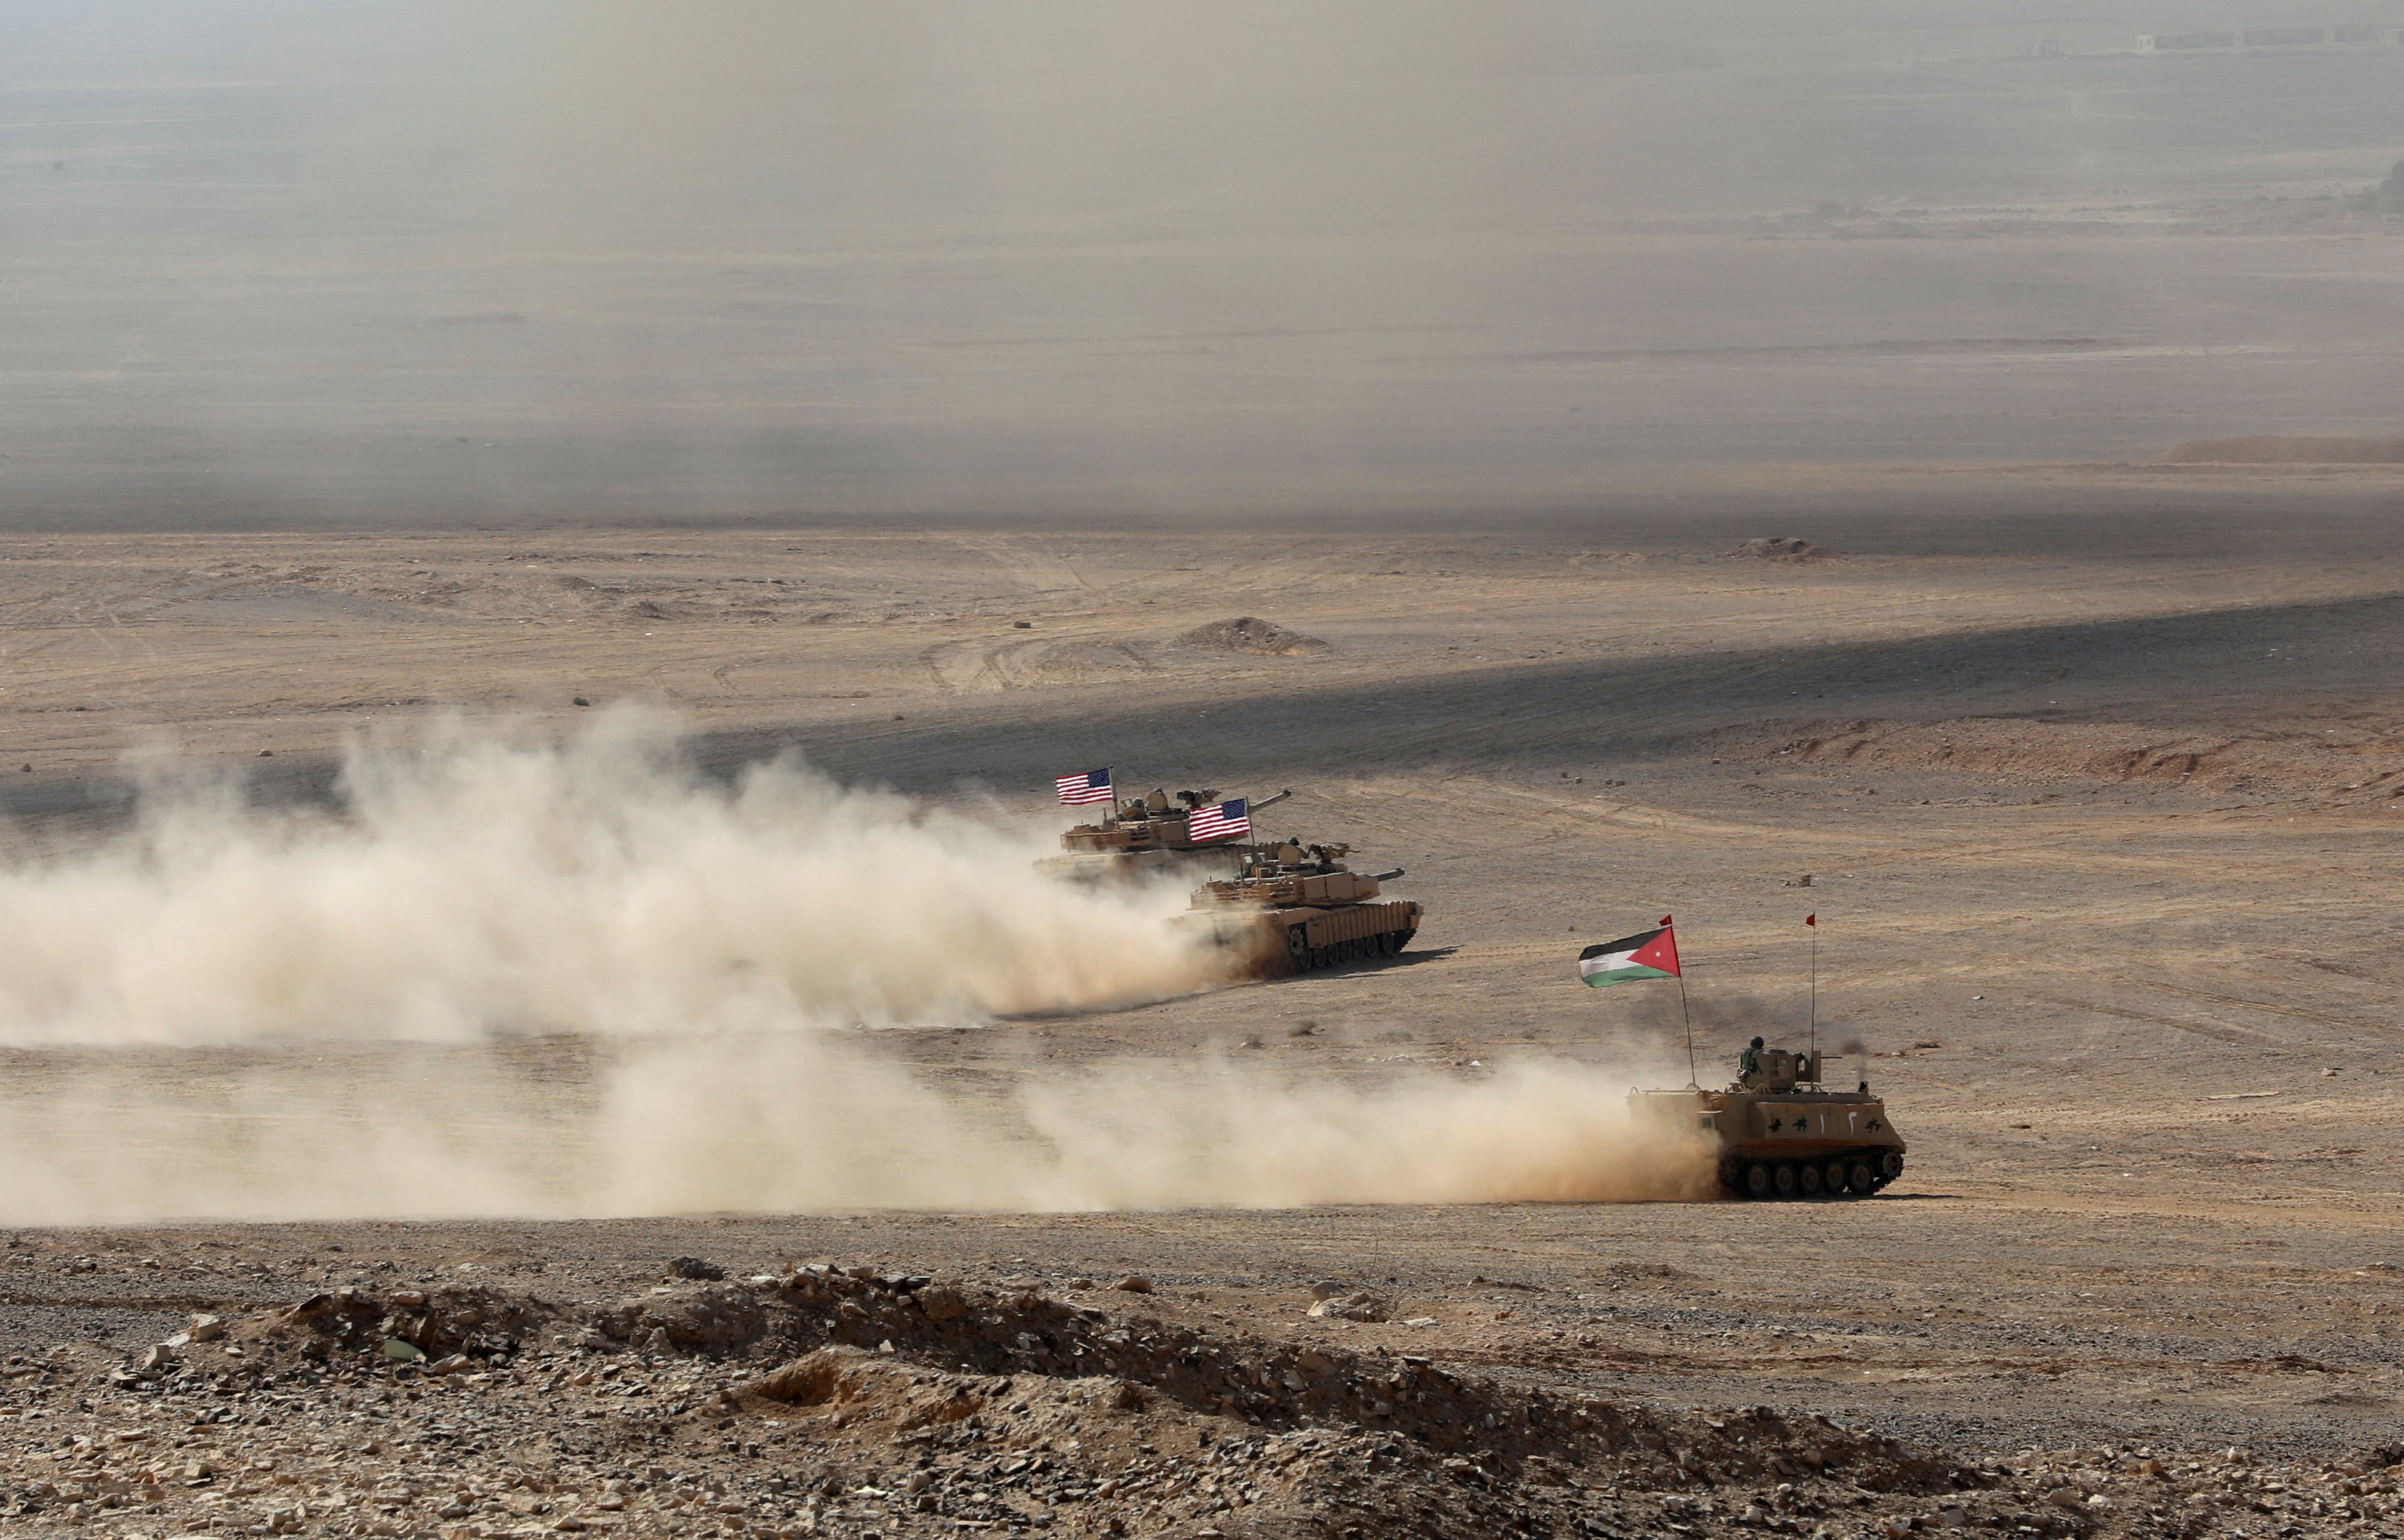 Armoured vehicles with Jordanian and US flags take part in a military exercise in Zarqa, Jordan in September 2022. Photo: Reuters